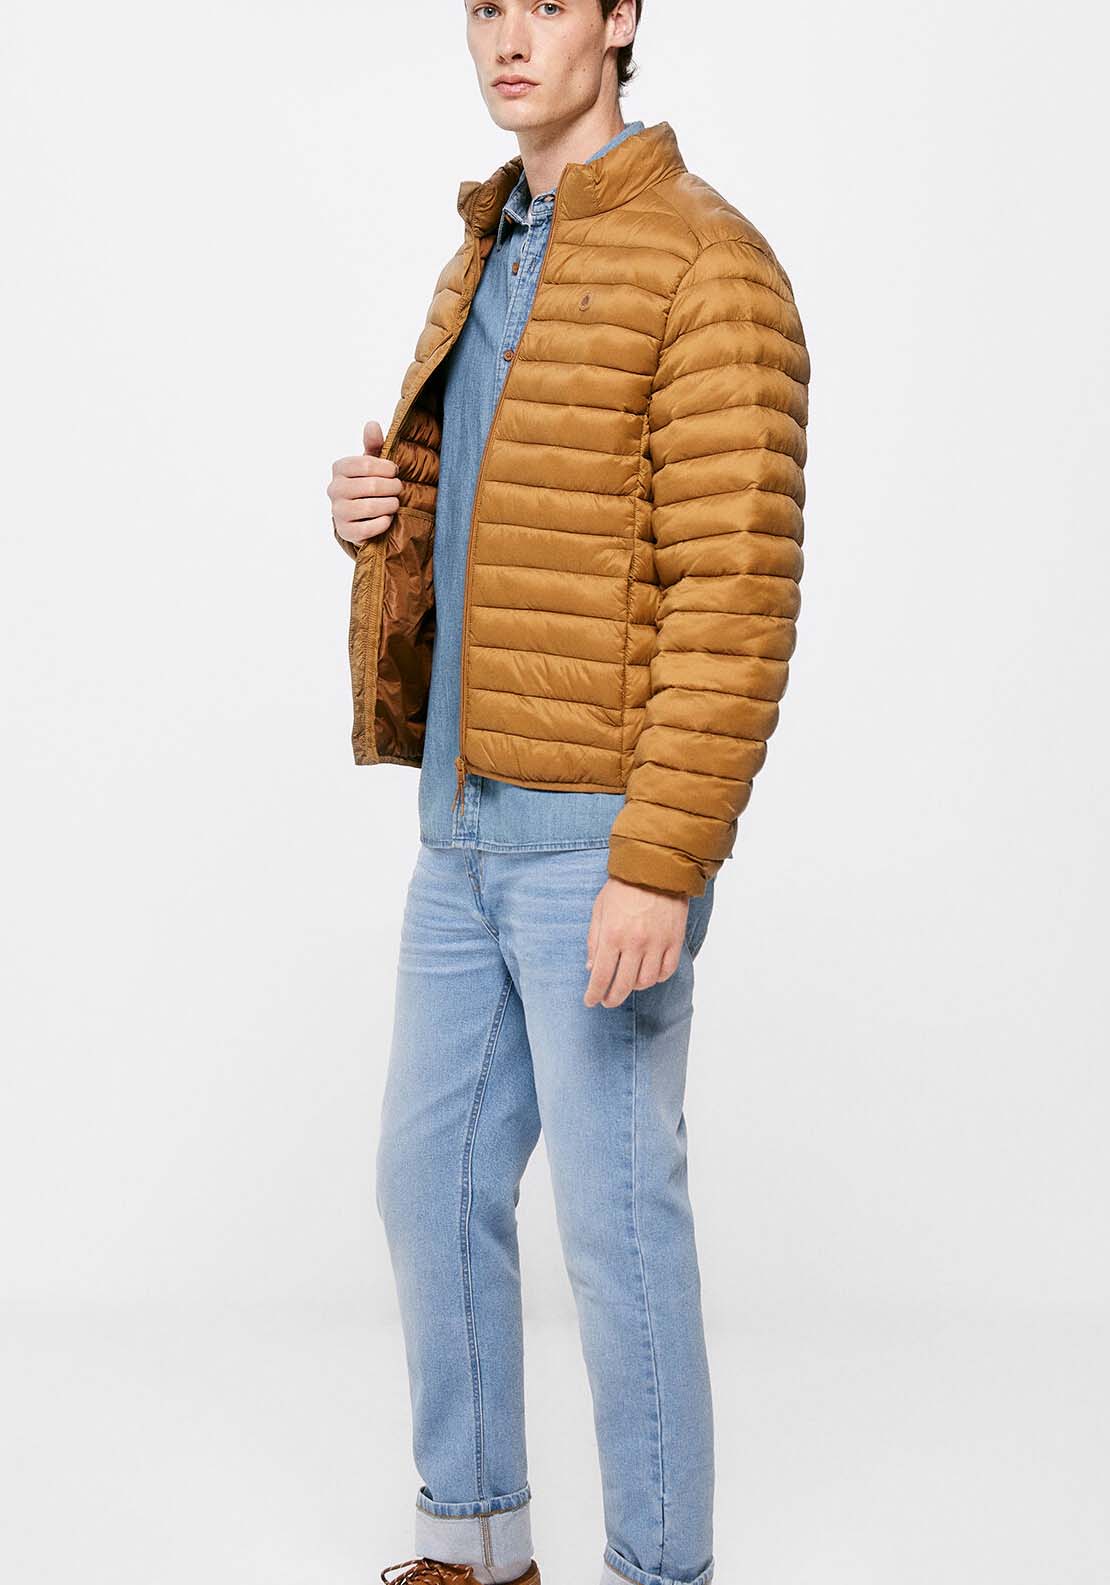 Springfield Quilted jacket - Tan 2 Shaws Department Stores